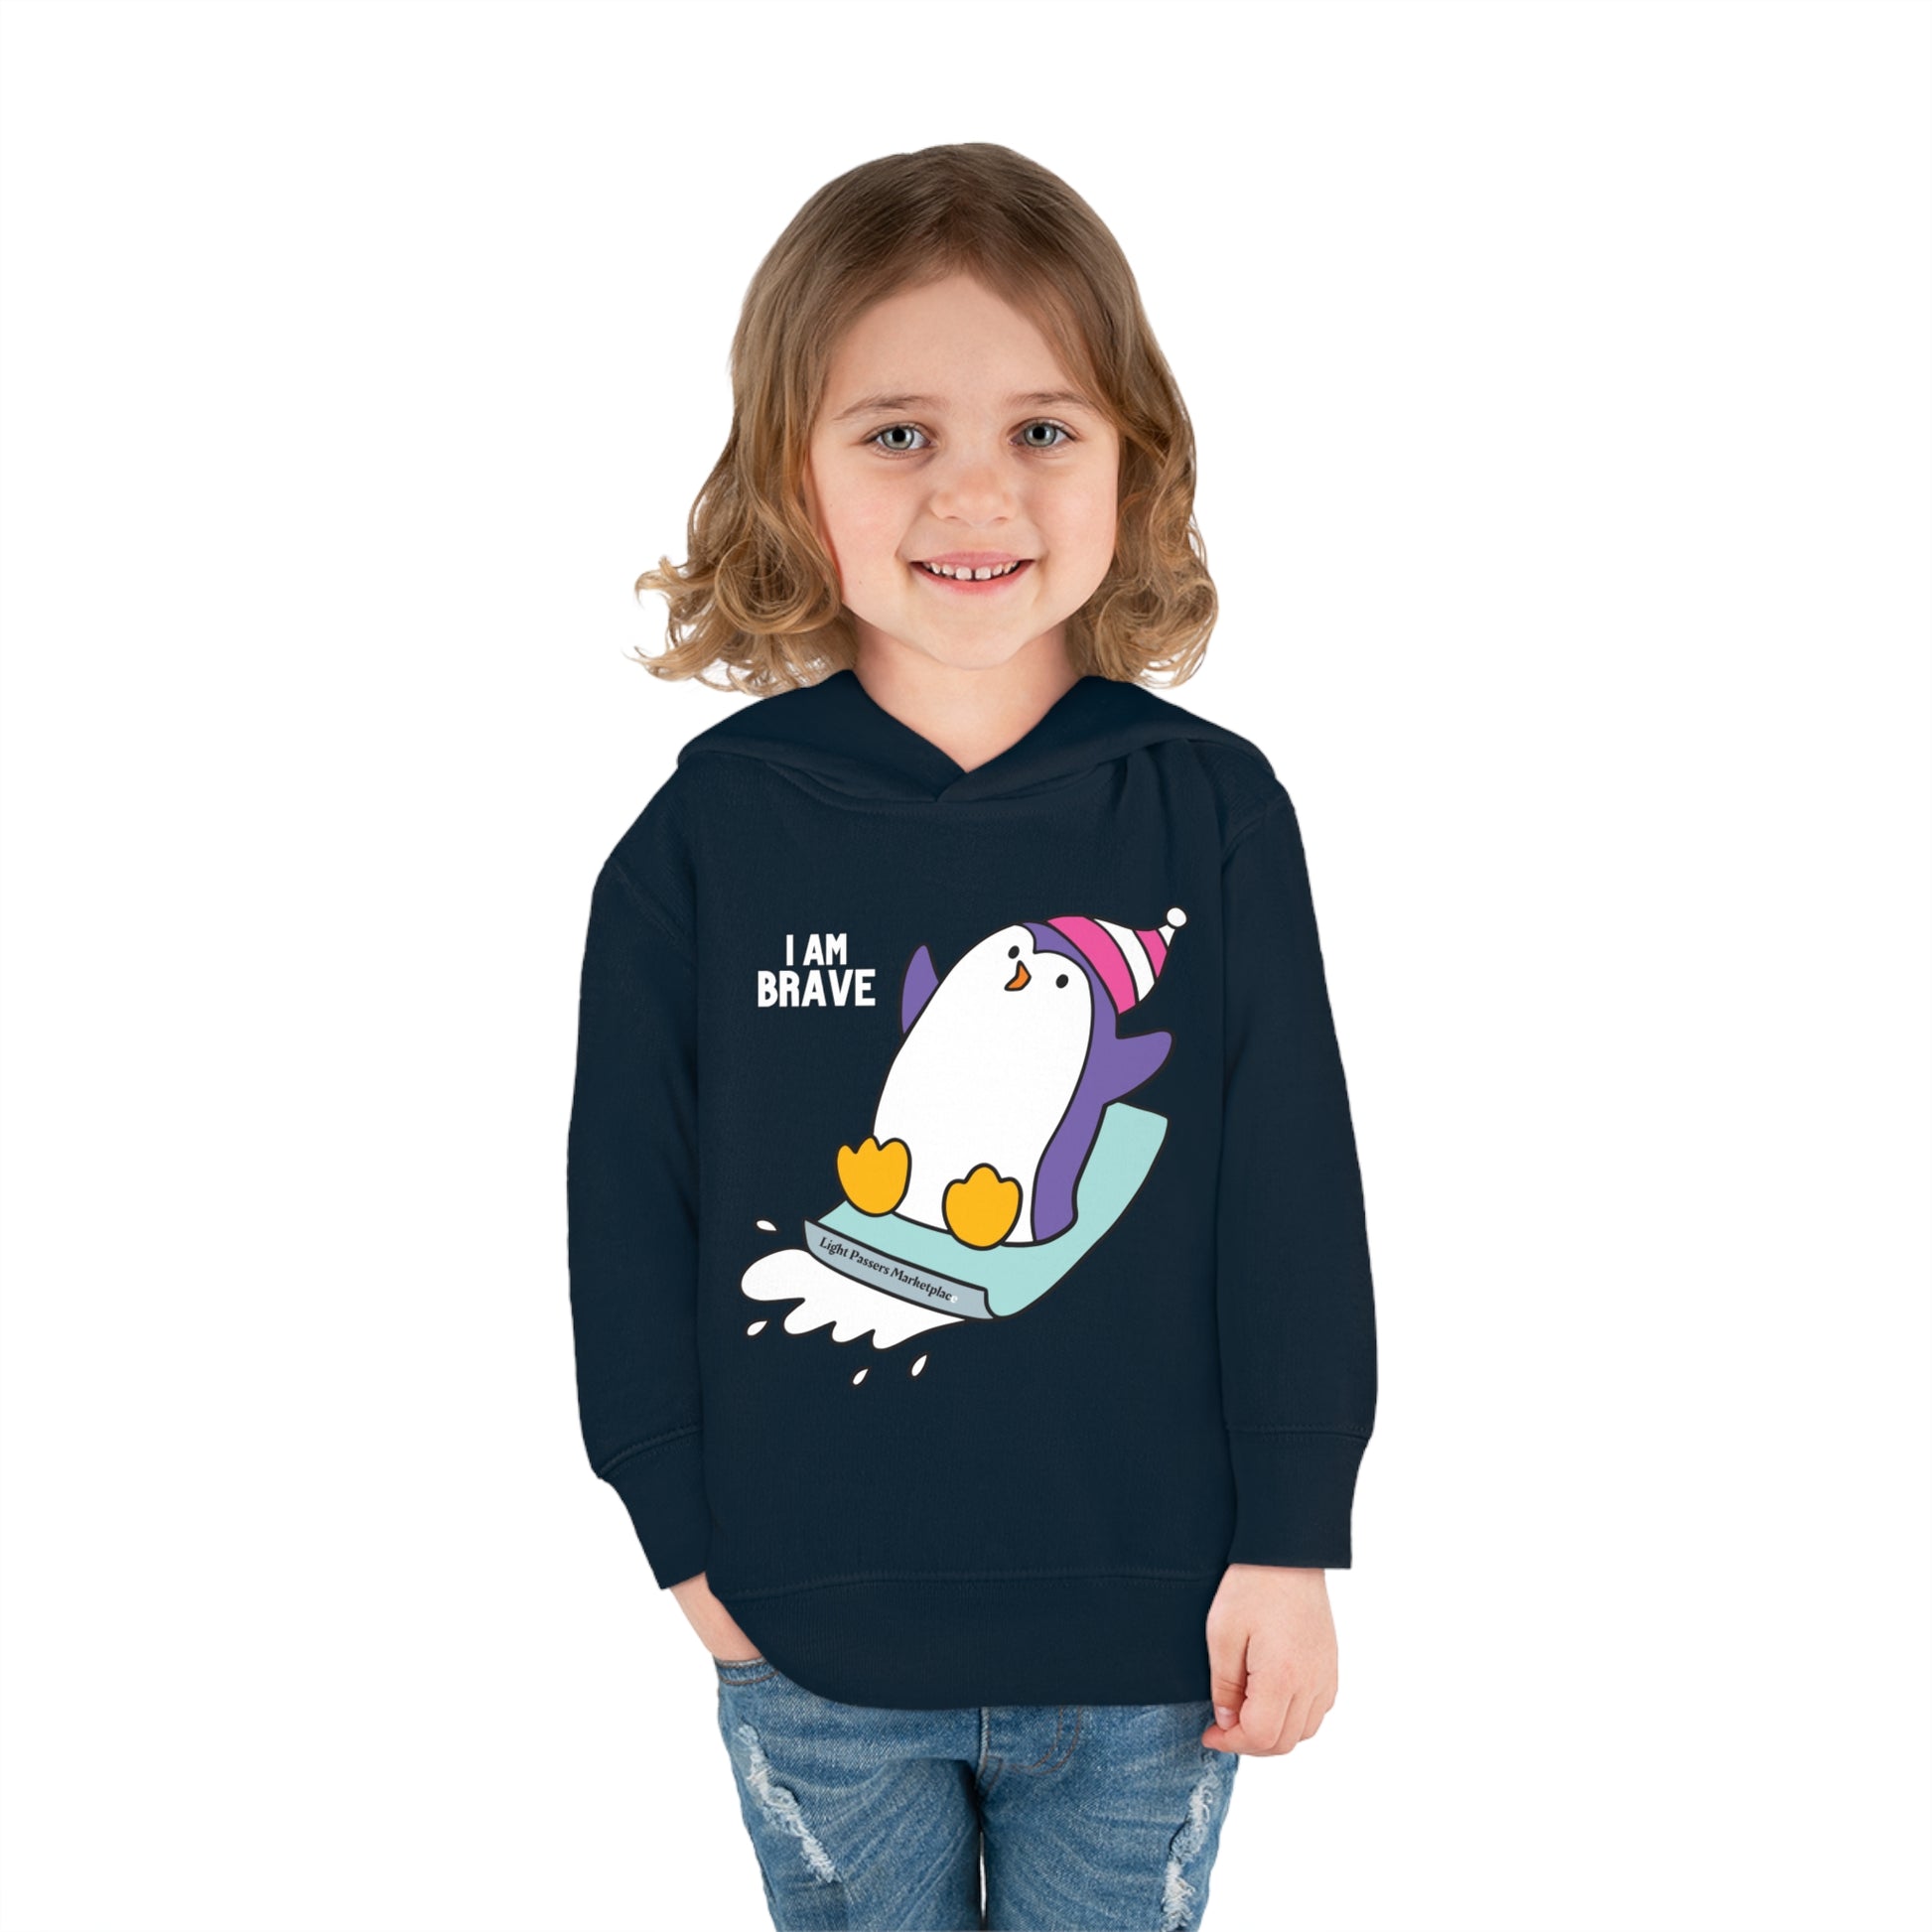 A smiling toddler in a Brave Penguin Toddler Hooded Sweatshirt with jersey-lined hood, cover-stitched details, and side seam pockets for cozy comfort.